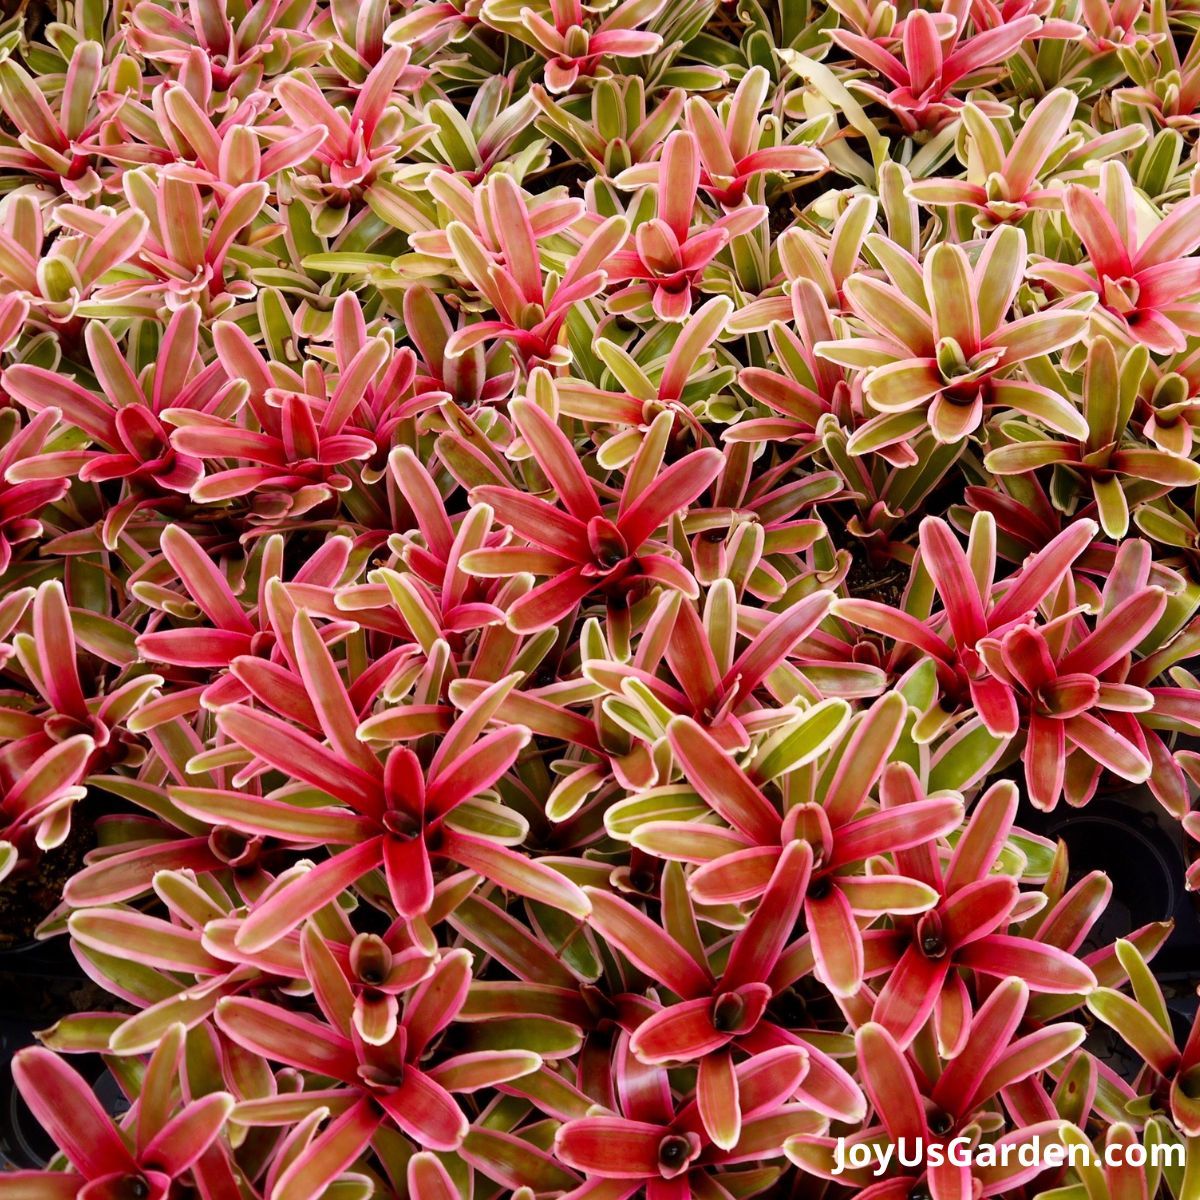 Neoregelias bromeliads being sold at a green house pretty pink and red color